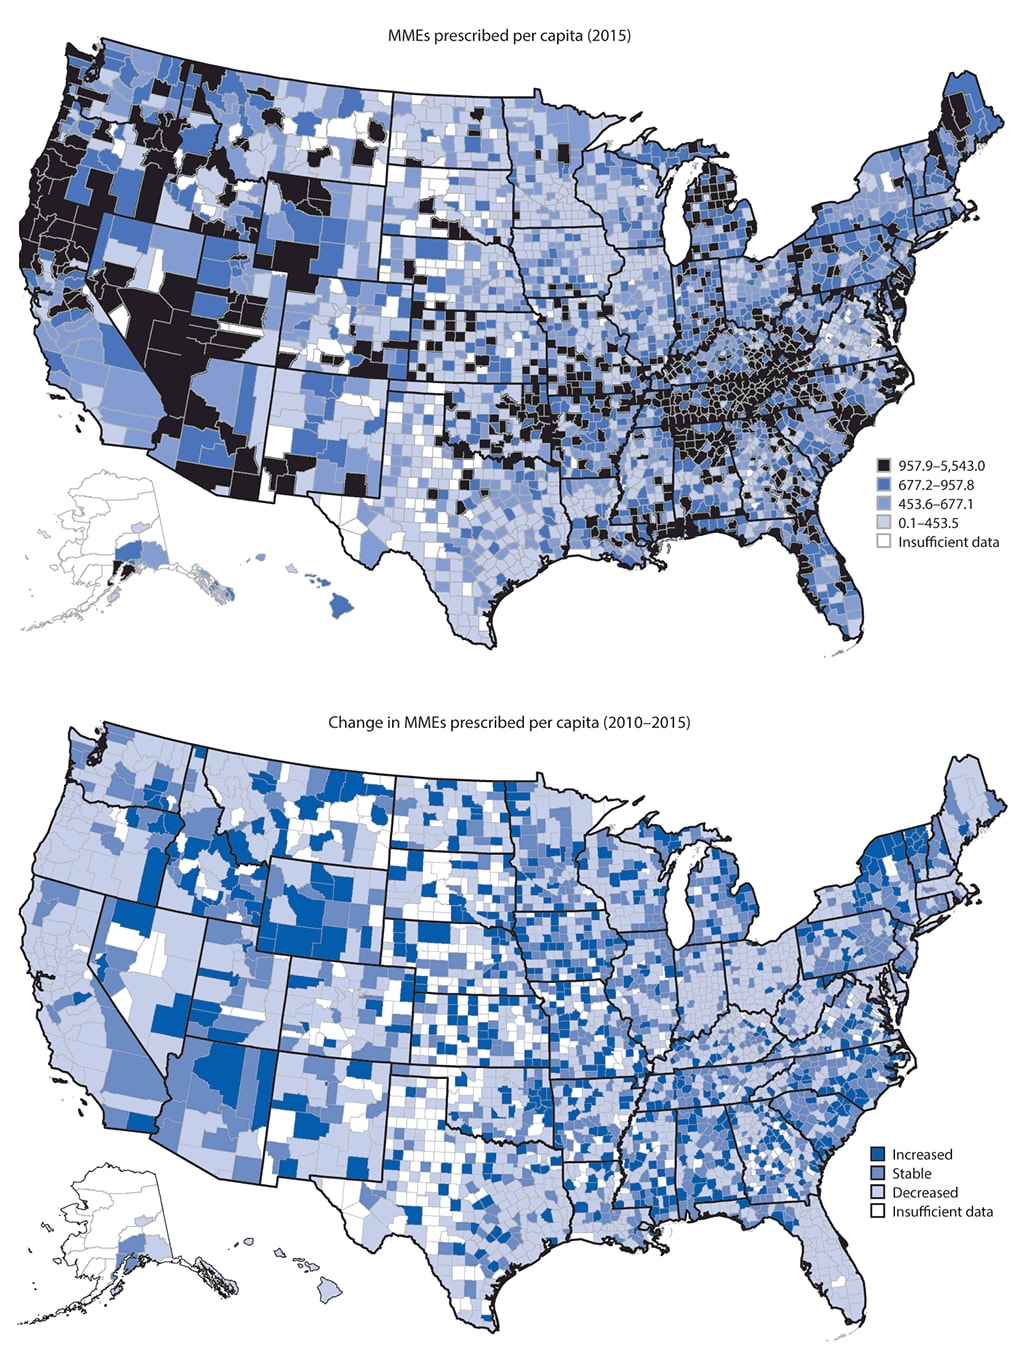 The figure above is a set of two maps of the United States showing the morphine milligram equivalents (MMEs) of opioids prescribed per capita in 2015 and change in MMEs per capita during 2010–2015, by county.